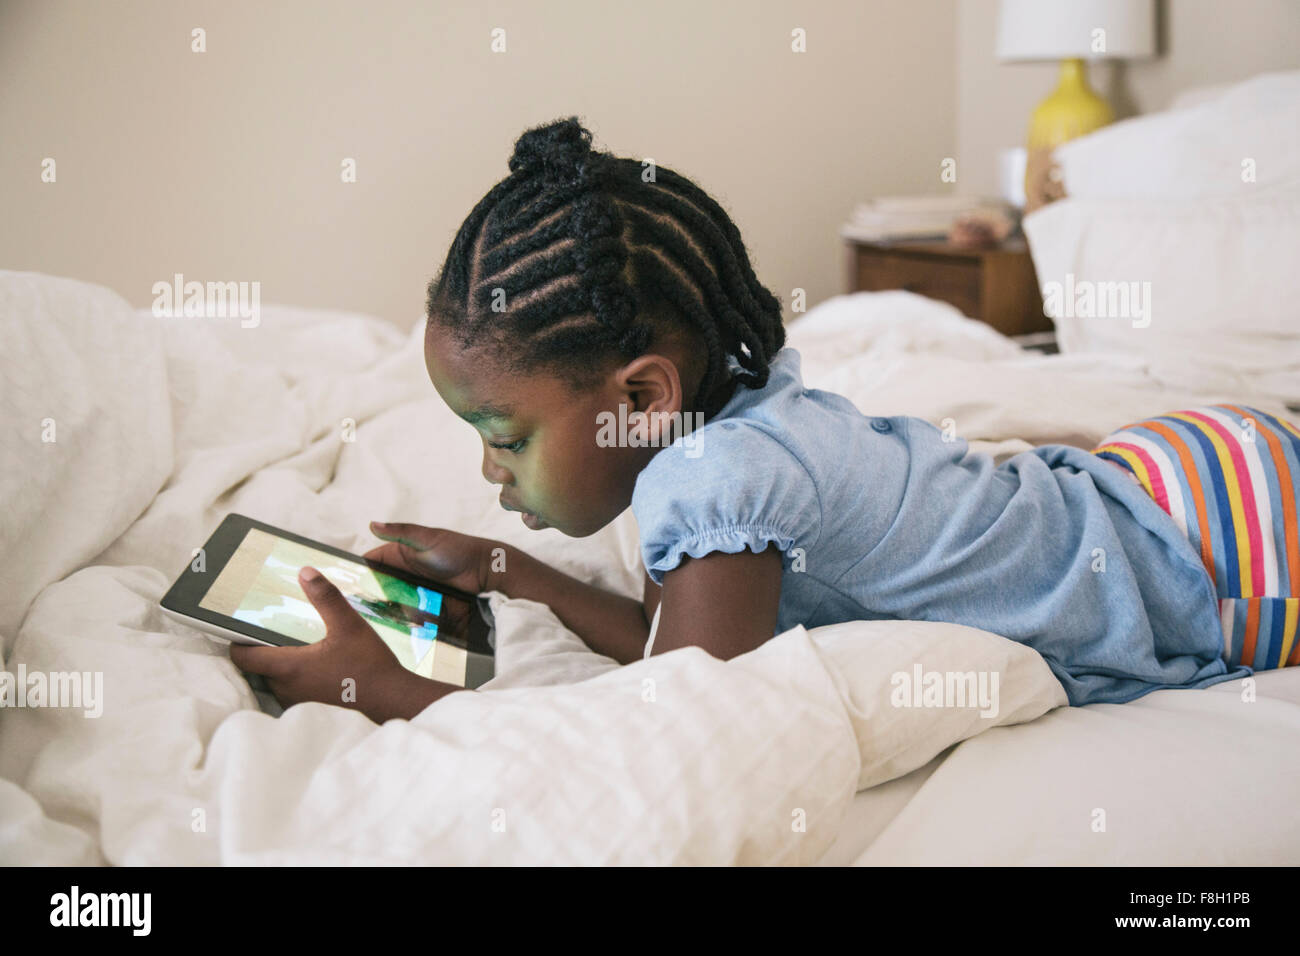 African American girl sitting on bed Banque D'Images